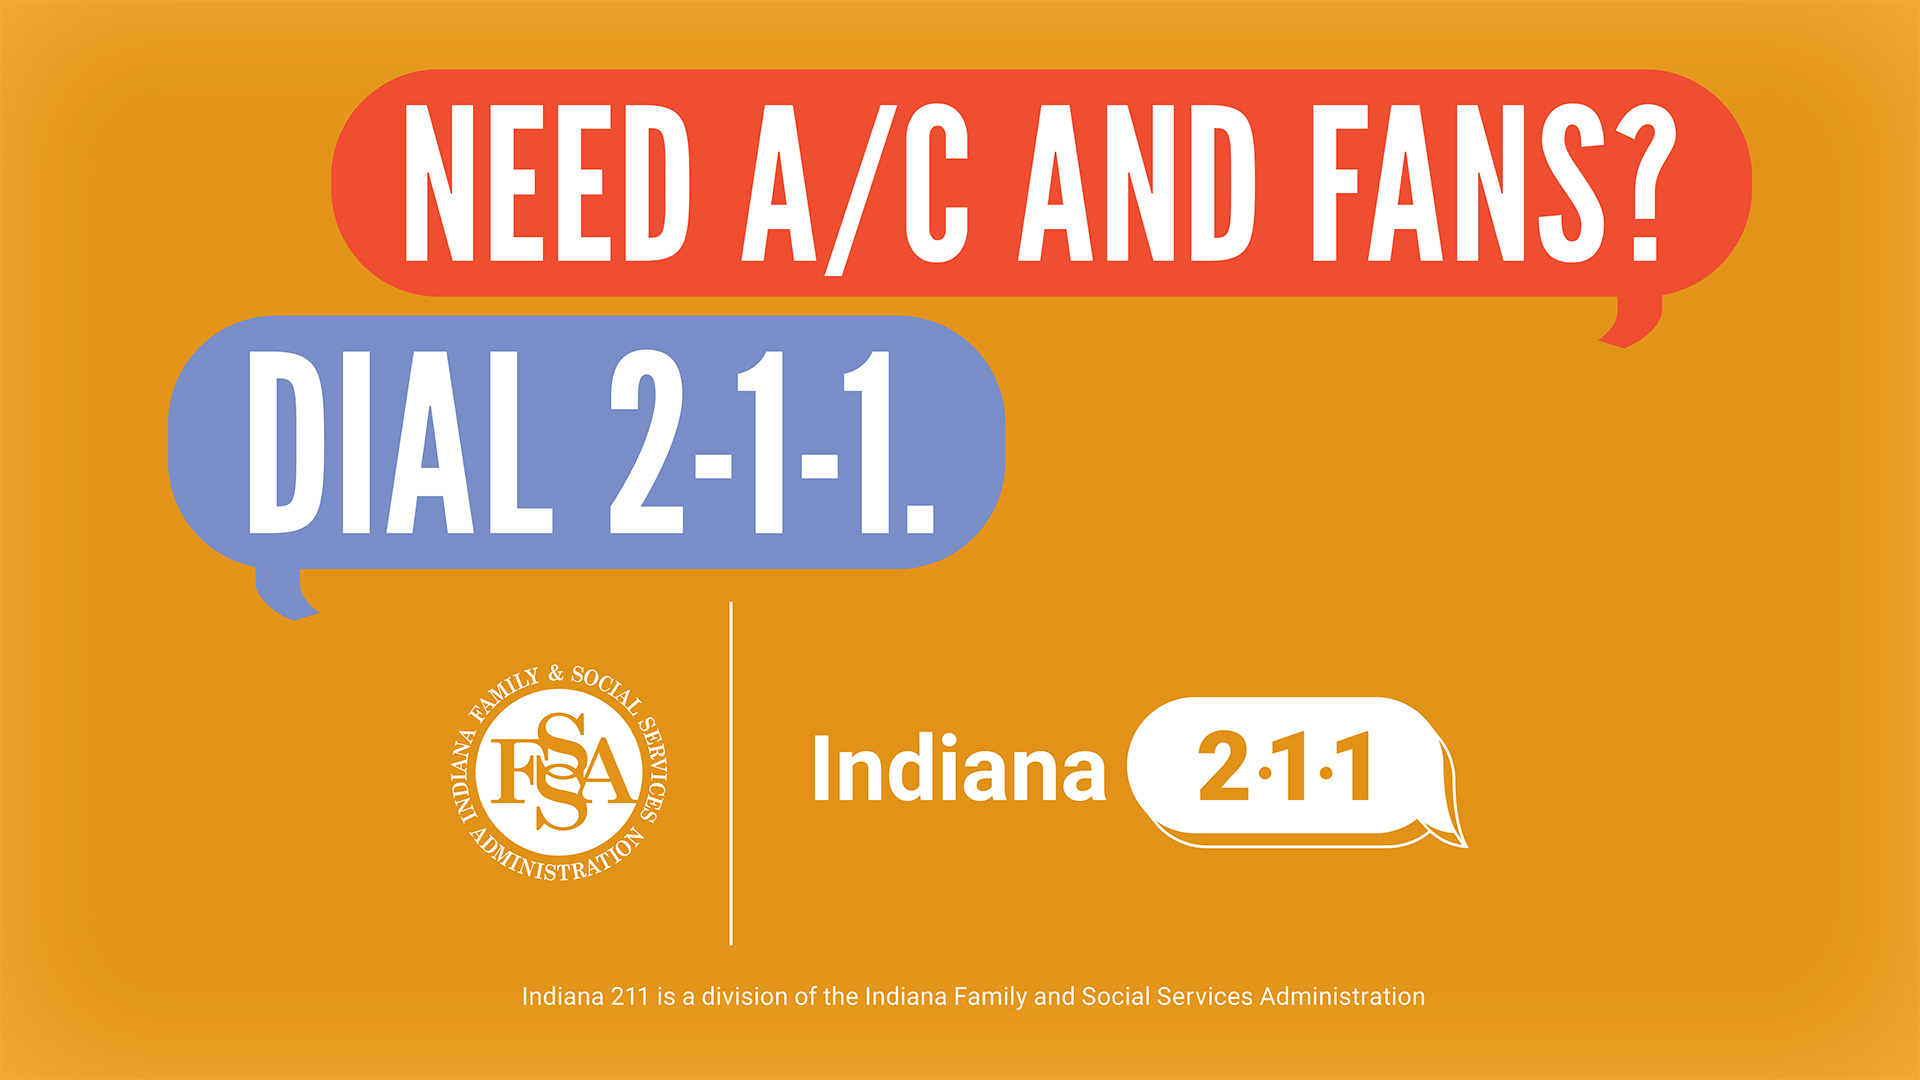 Need A/C and Fans? Dial 2-1-1